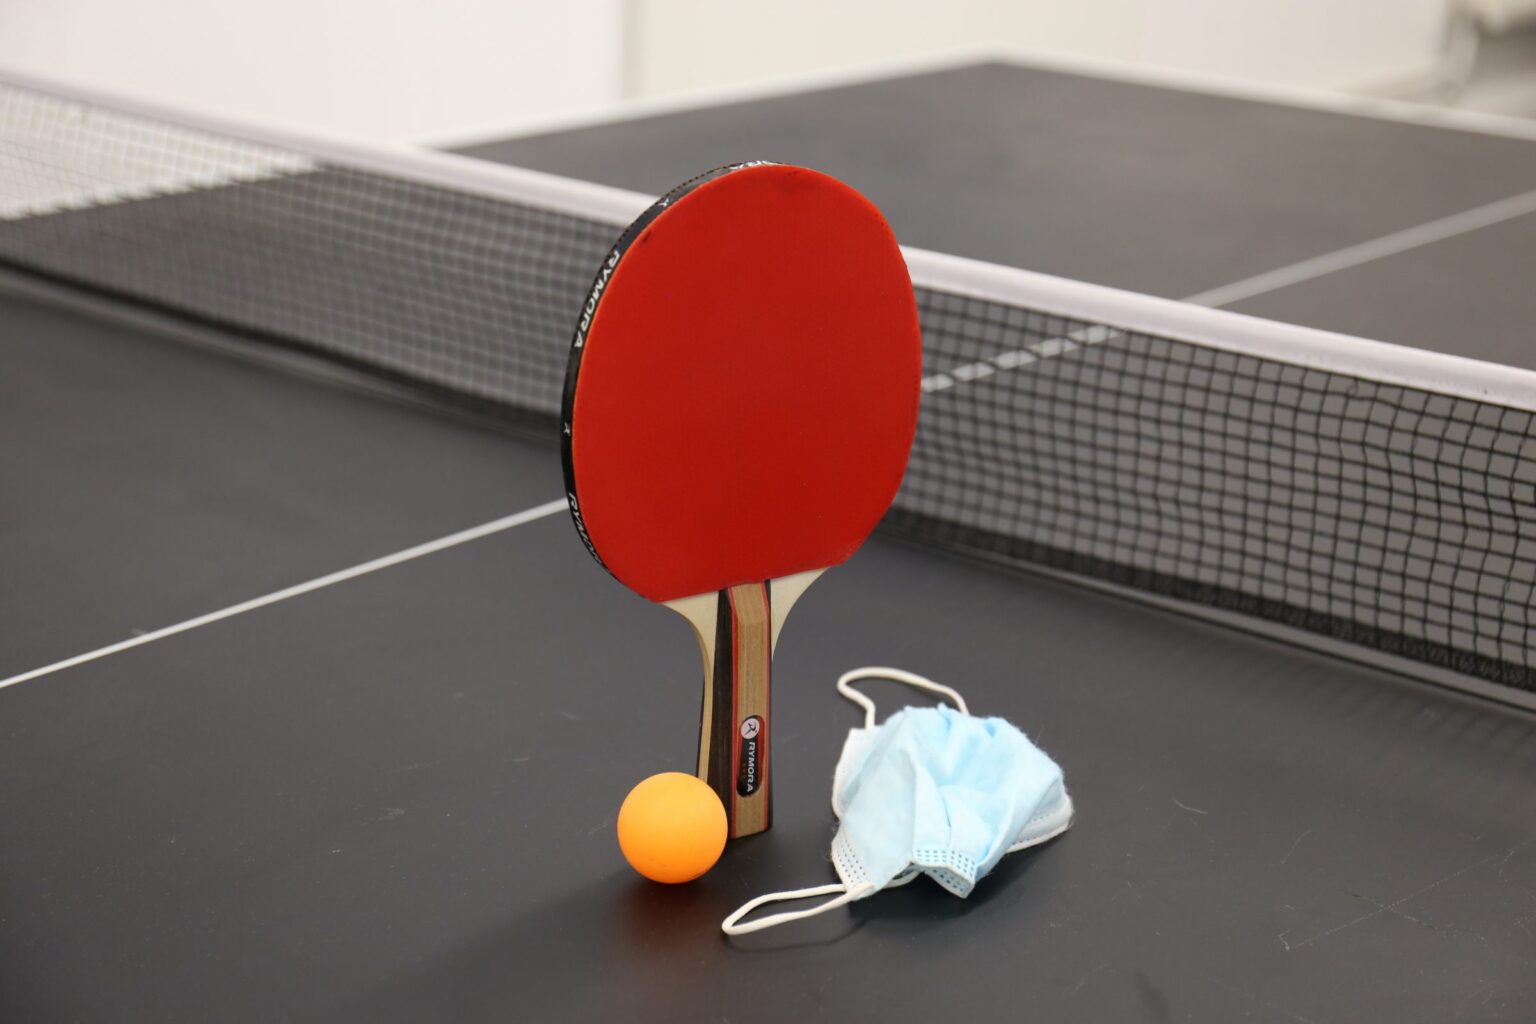 Ping pong bat and ball with face mask laid next to it